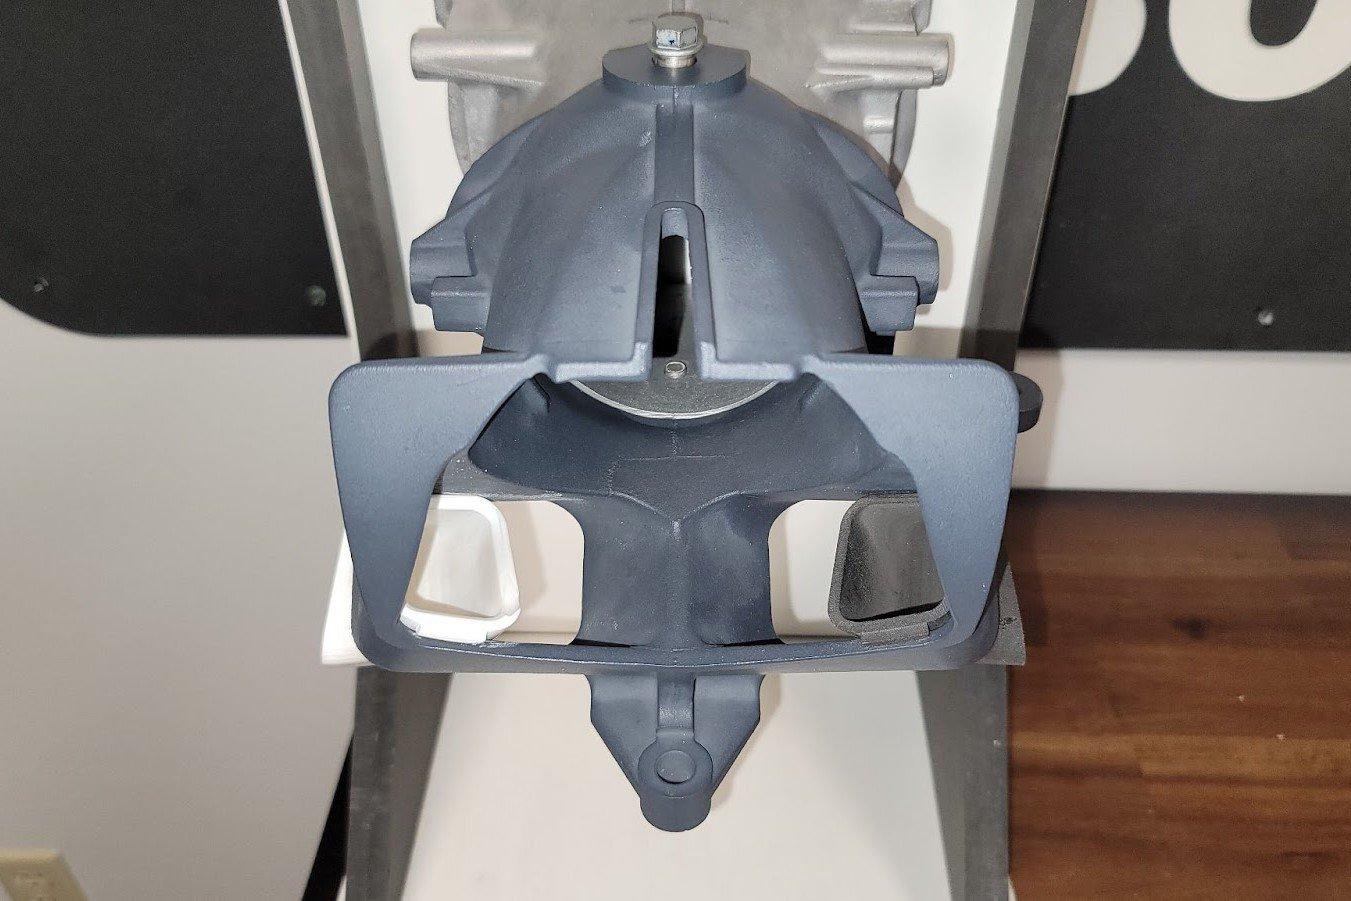 example of aftermarket parts with 3D printing - jetboat